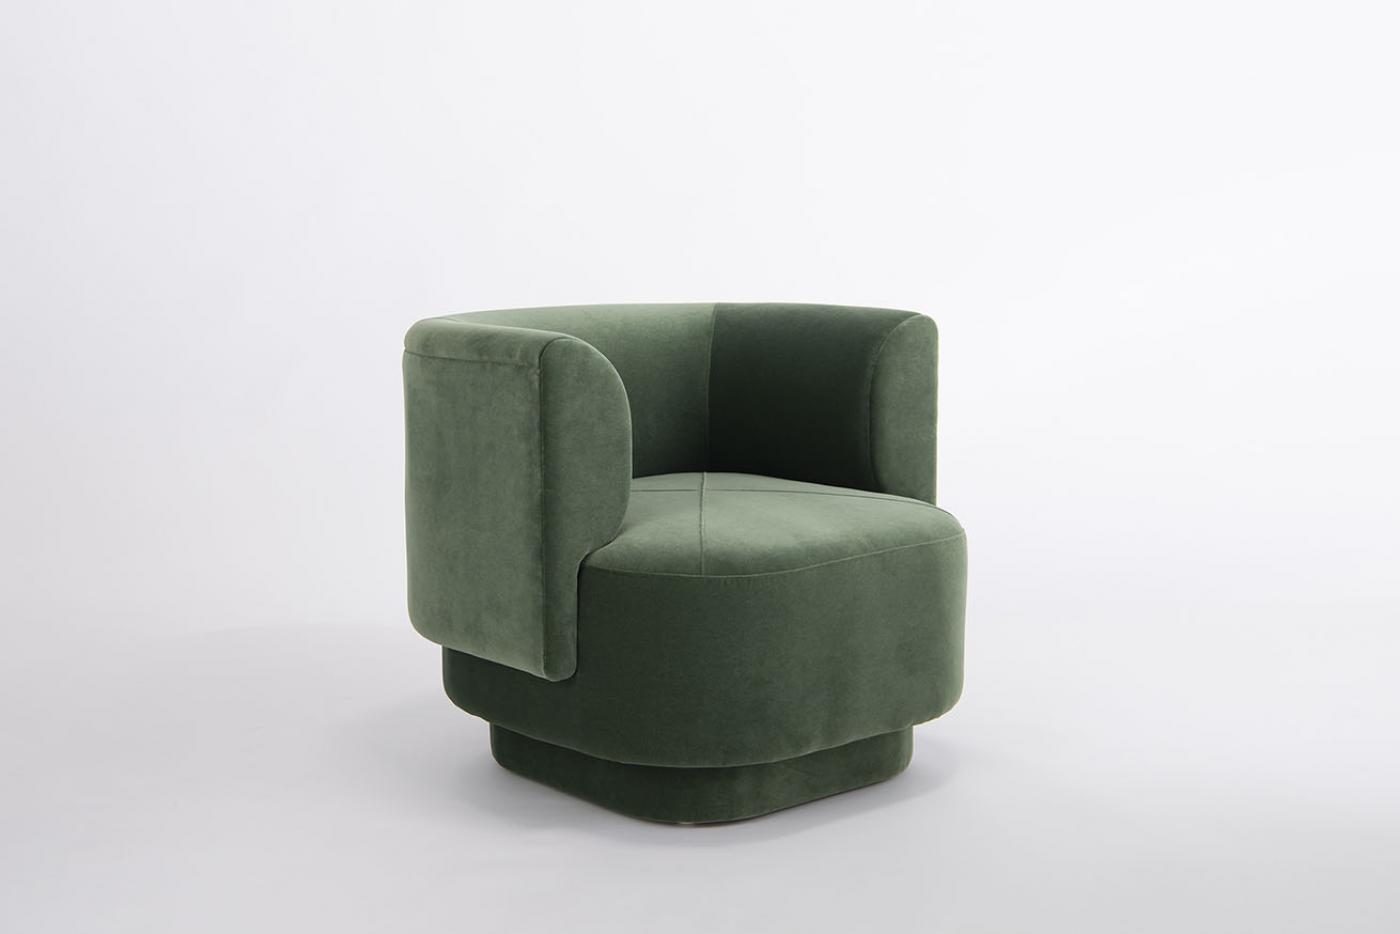 Phase Design - Capper Lounge Chair